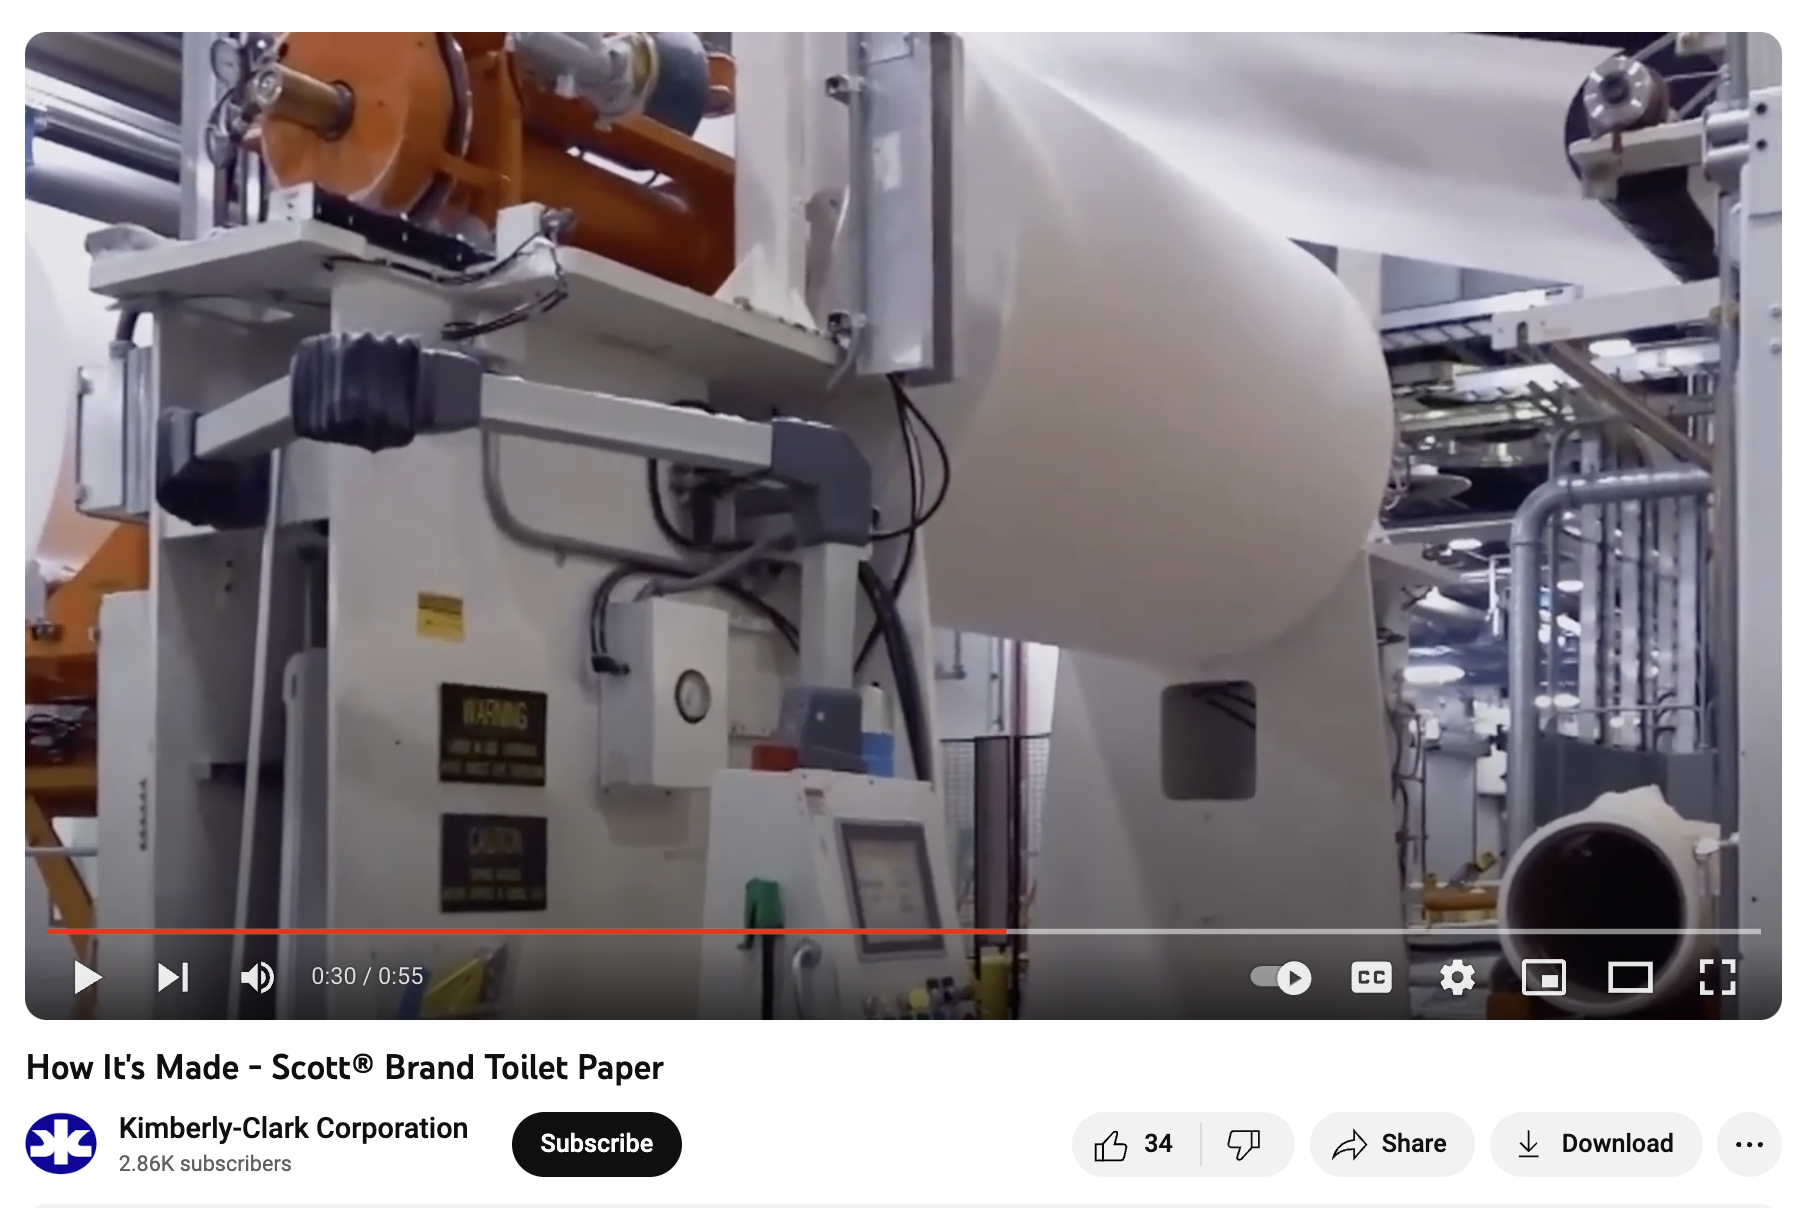 A Scott® YouTube video showing how toilet paper is made in the brand's factory.